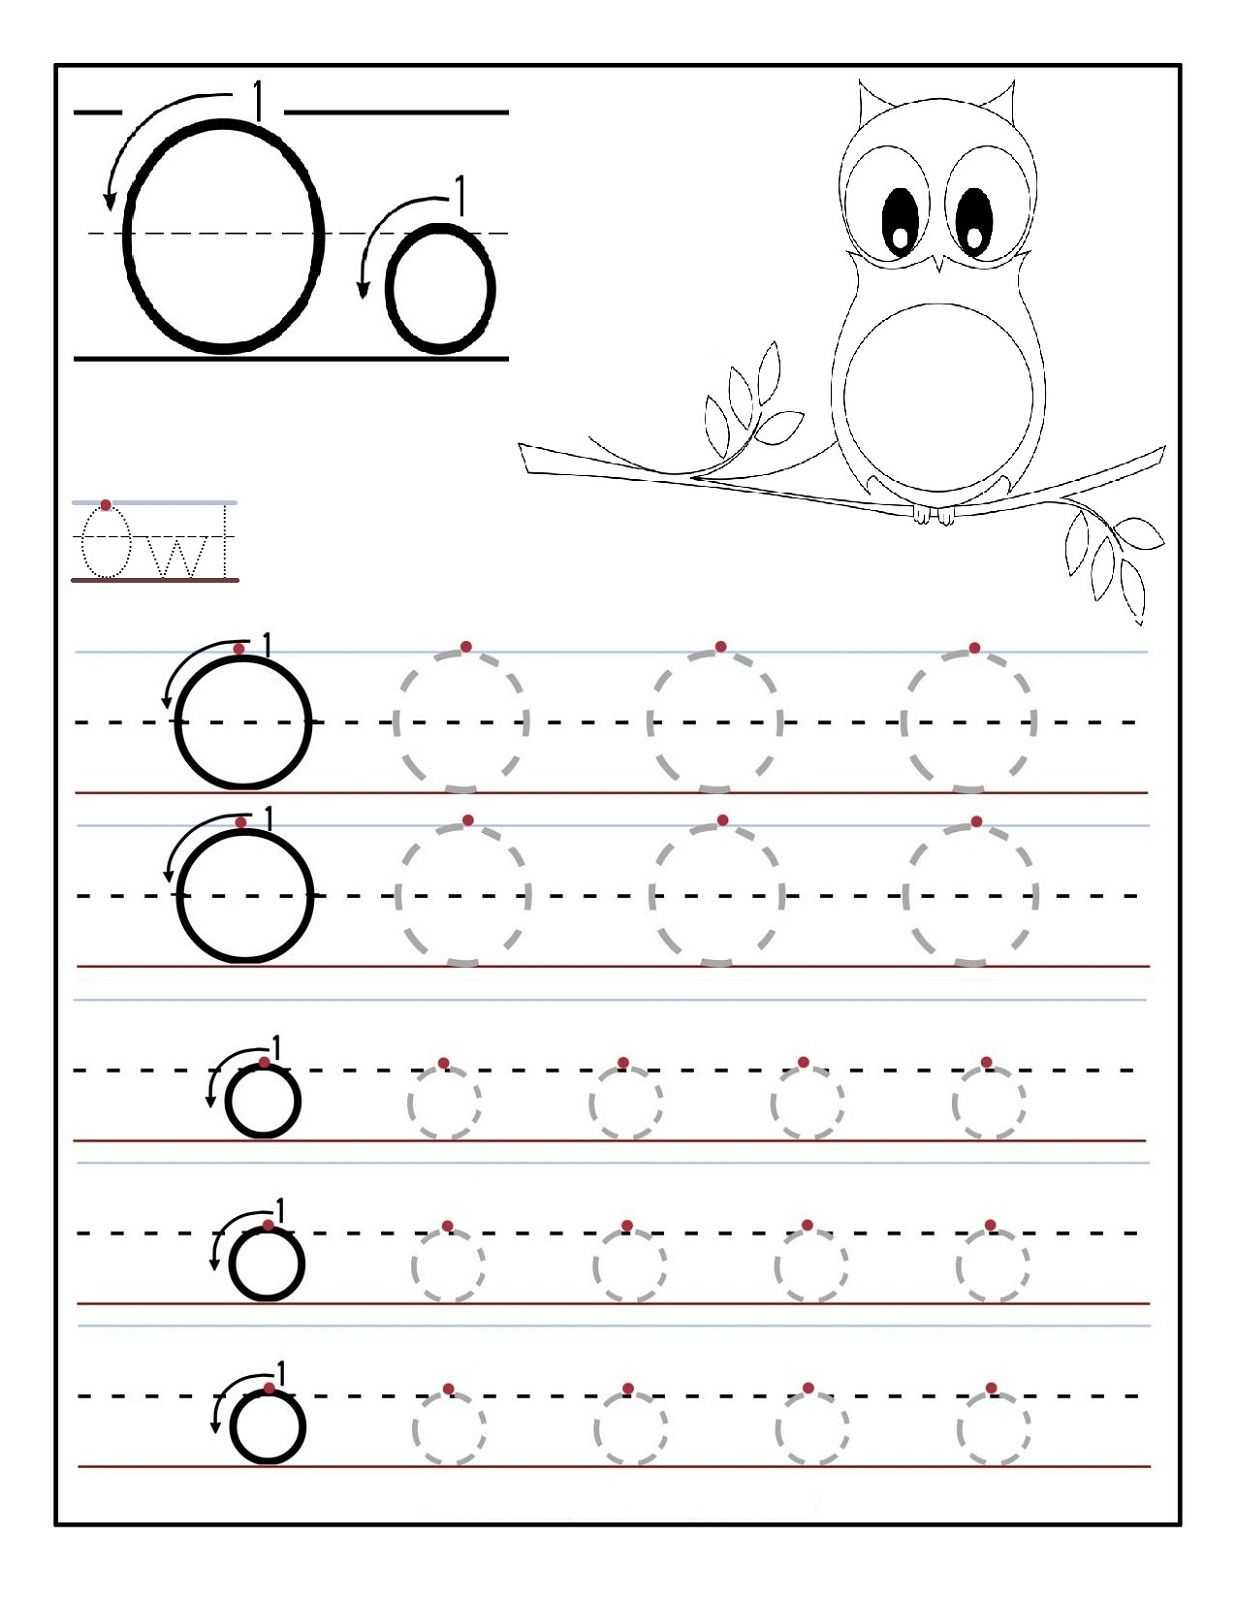 Fall Worksheets for Preschool with Letter O Worksheets for Preschool Activity Shelter